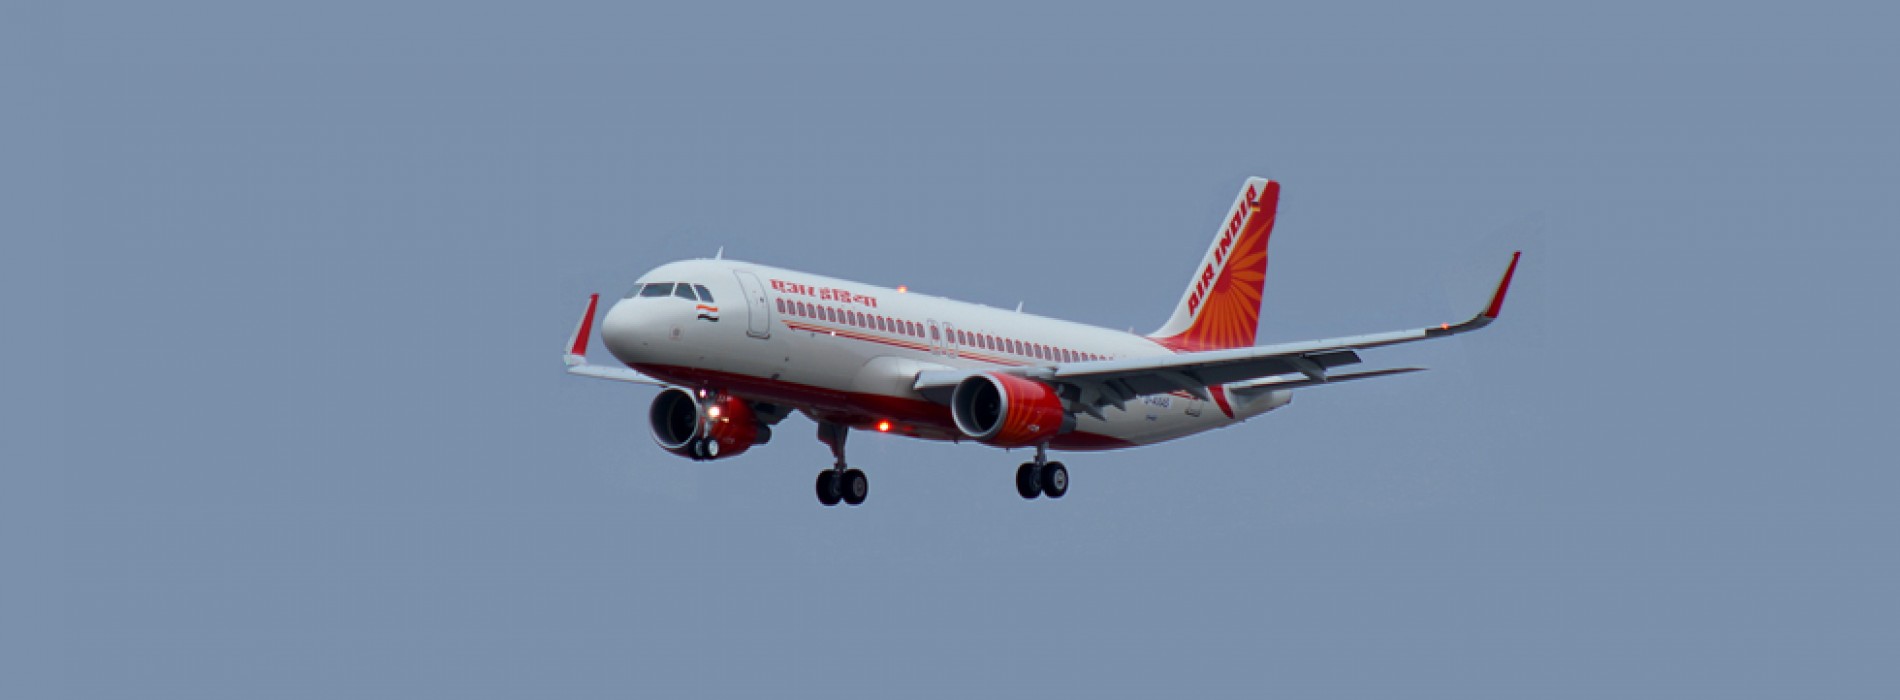 Substantial progress in operational and financial areas by Air India